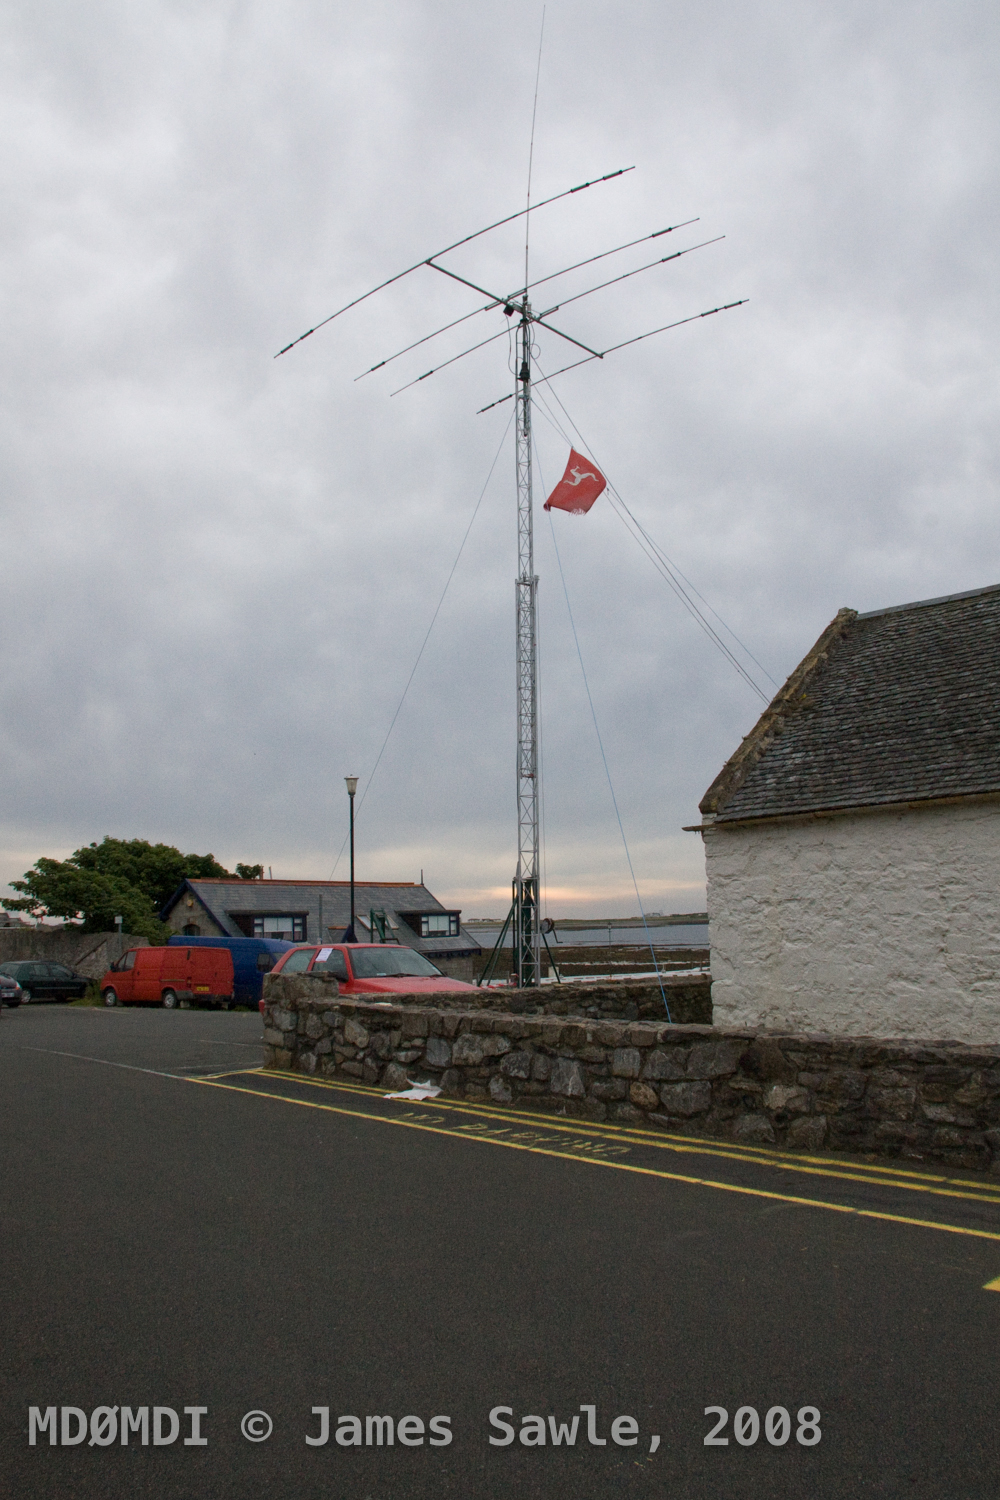 Manx Flag flying in the Windy Conditions at the Old Grammar School in Castletown for GB4MNH.